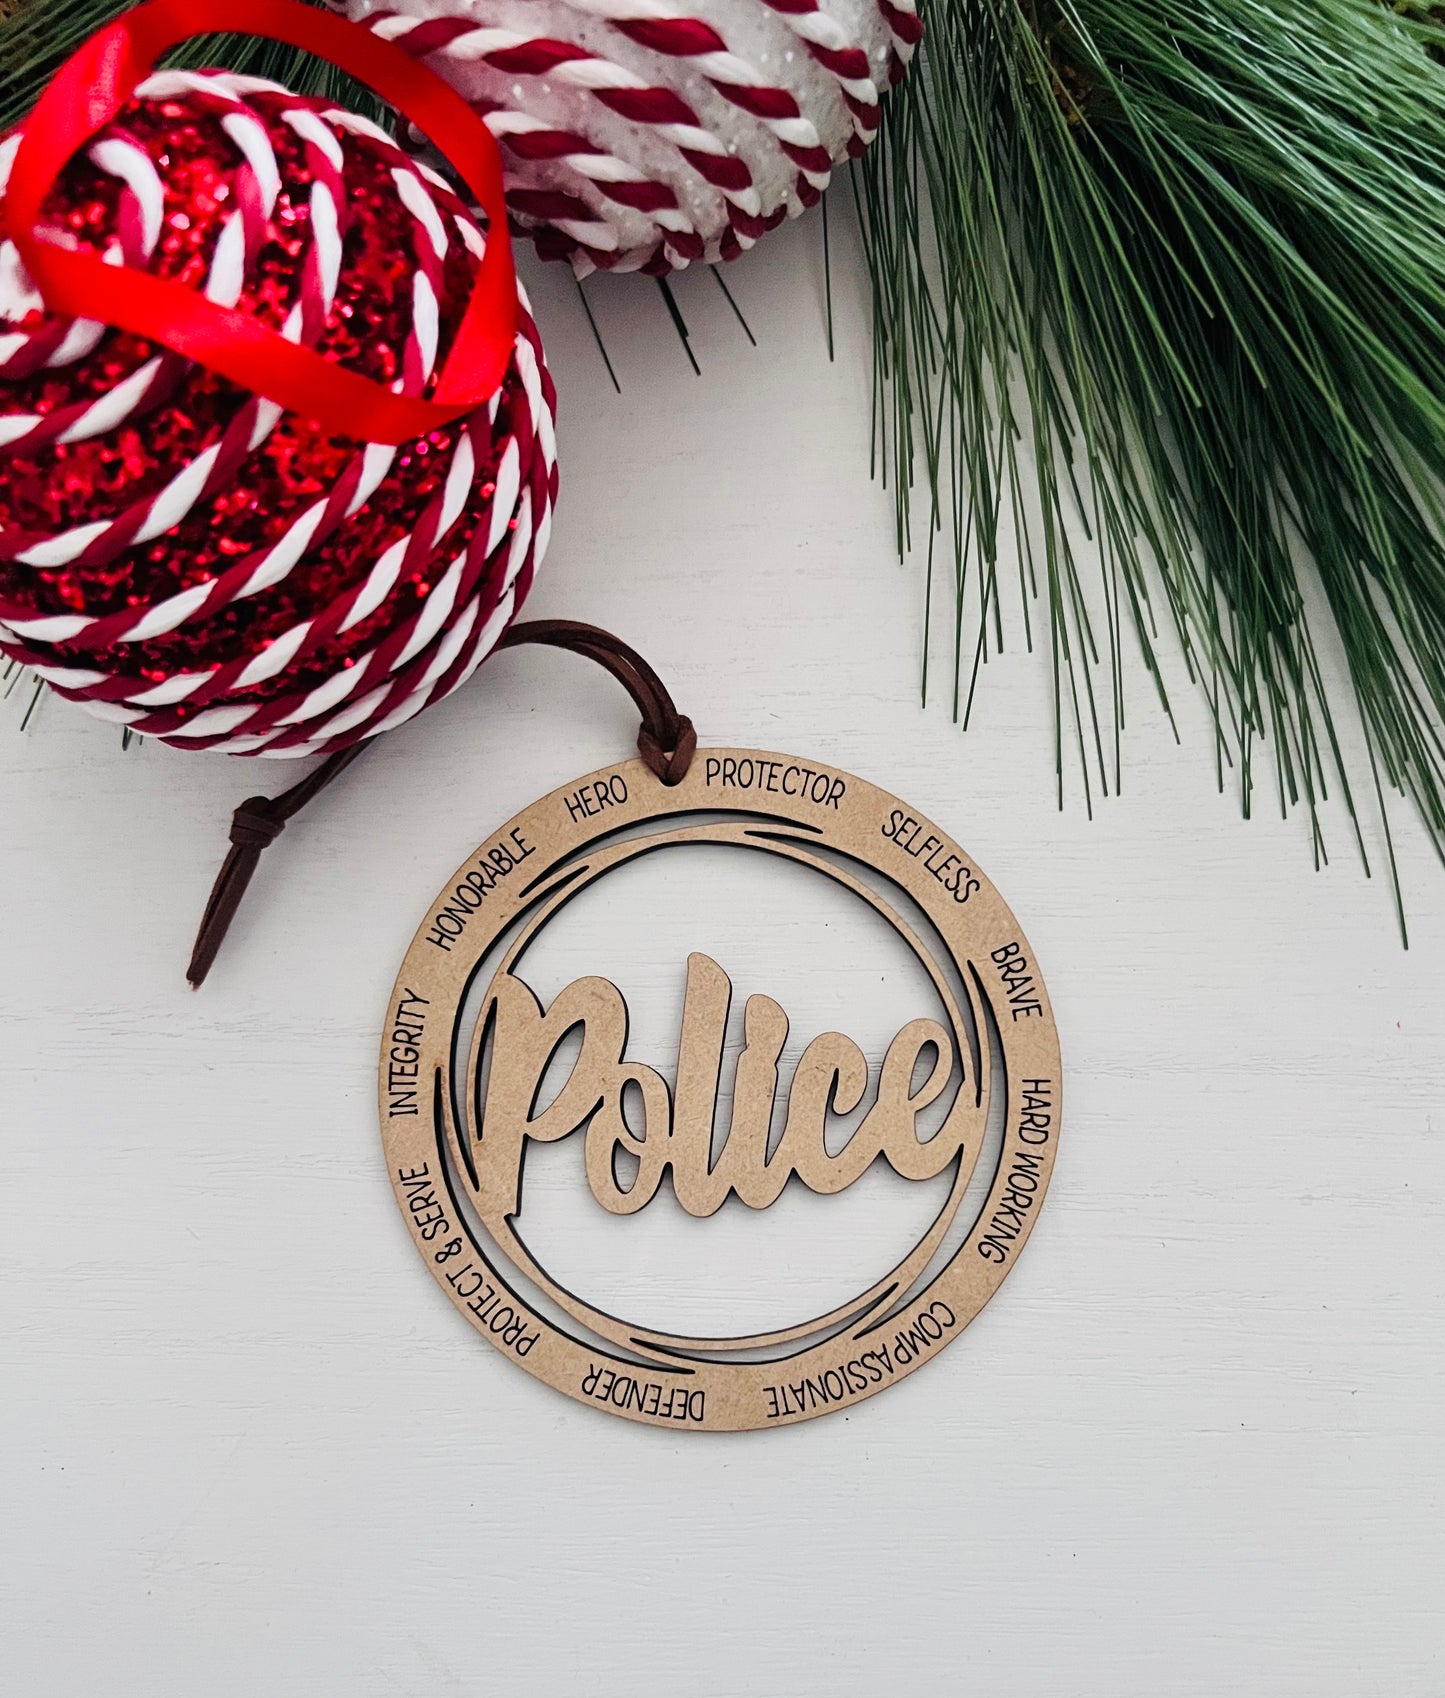 Police, Firefighter, EMS, and Dispatcher Ornaments